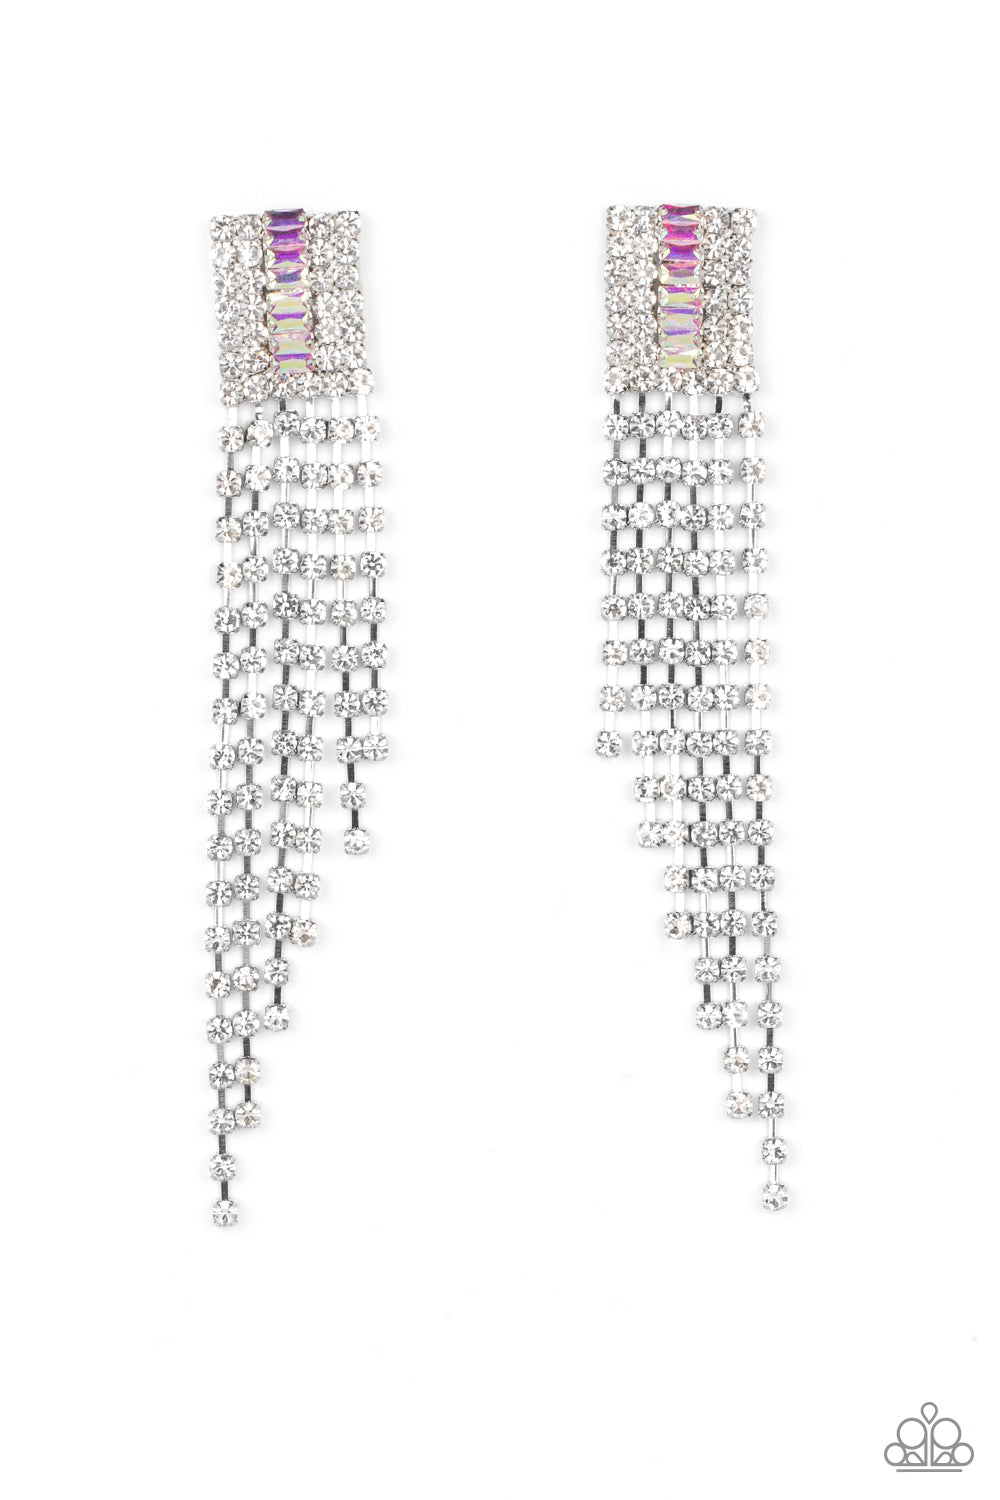 A-Lister Affirmations - Iridescent May 2022 Life of the Party Earrings a smattering of iridescent stones in the center of a glittering square of rhinestones is dazzling with various lengths of dripping rhinestones. Earring attaches to a standard post fitting.  Sold as one pair of post-style earrings.  May 2022 Life of the Party Exclusive item